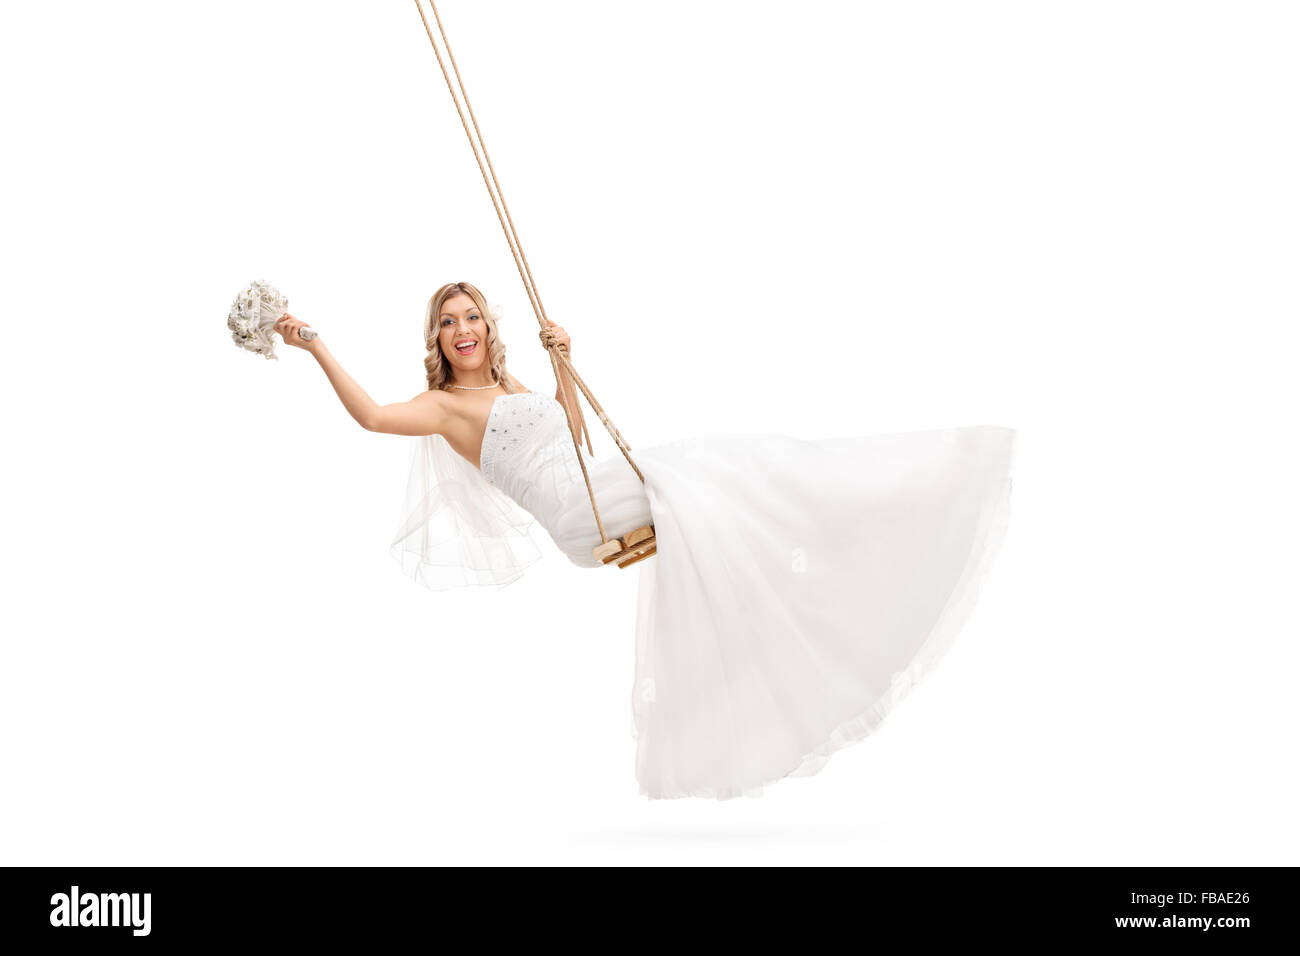 Carefree young bride swinging on a wooden swing and holding a wedding flower isolated on white background Stock Photo